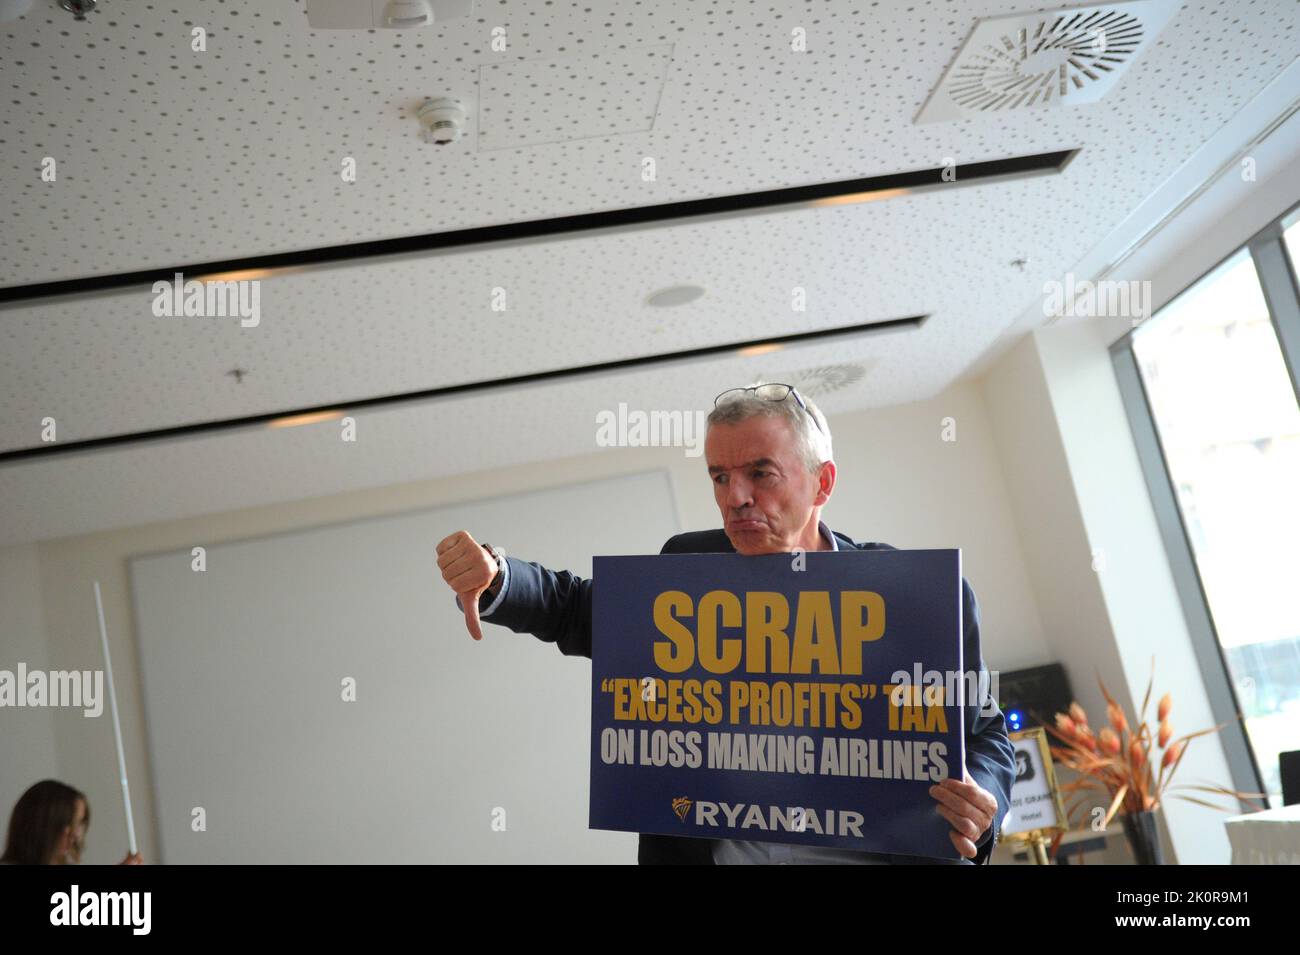 Budapest, Hungary, 13/09/2022, The CEO of Ryanair, Michael O’Leary holds a sign saying "Scrap "Excess Profits" Tax on loss making airlines", Budapest, Hungary, 13th Sep 2022, Balint Szentgallay / Alamy Live News Stock Photo